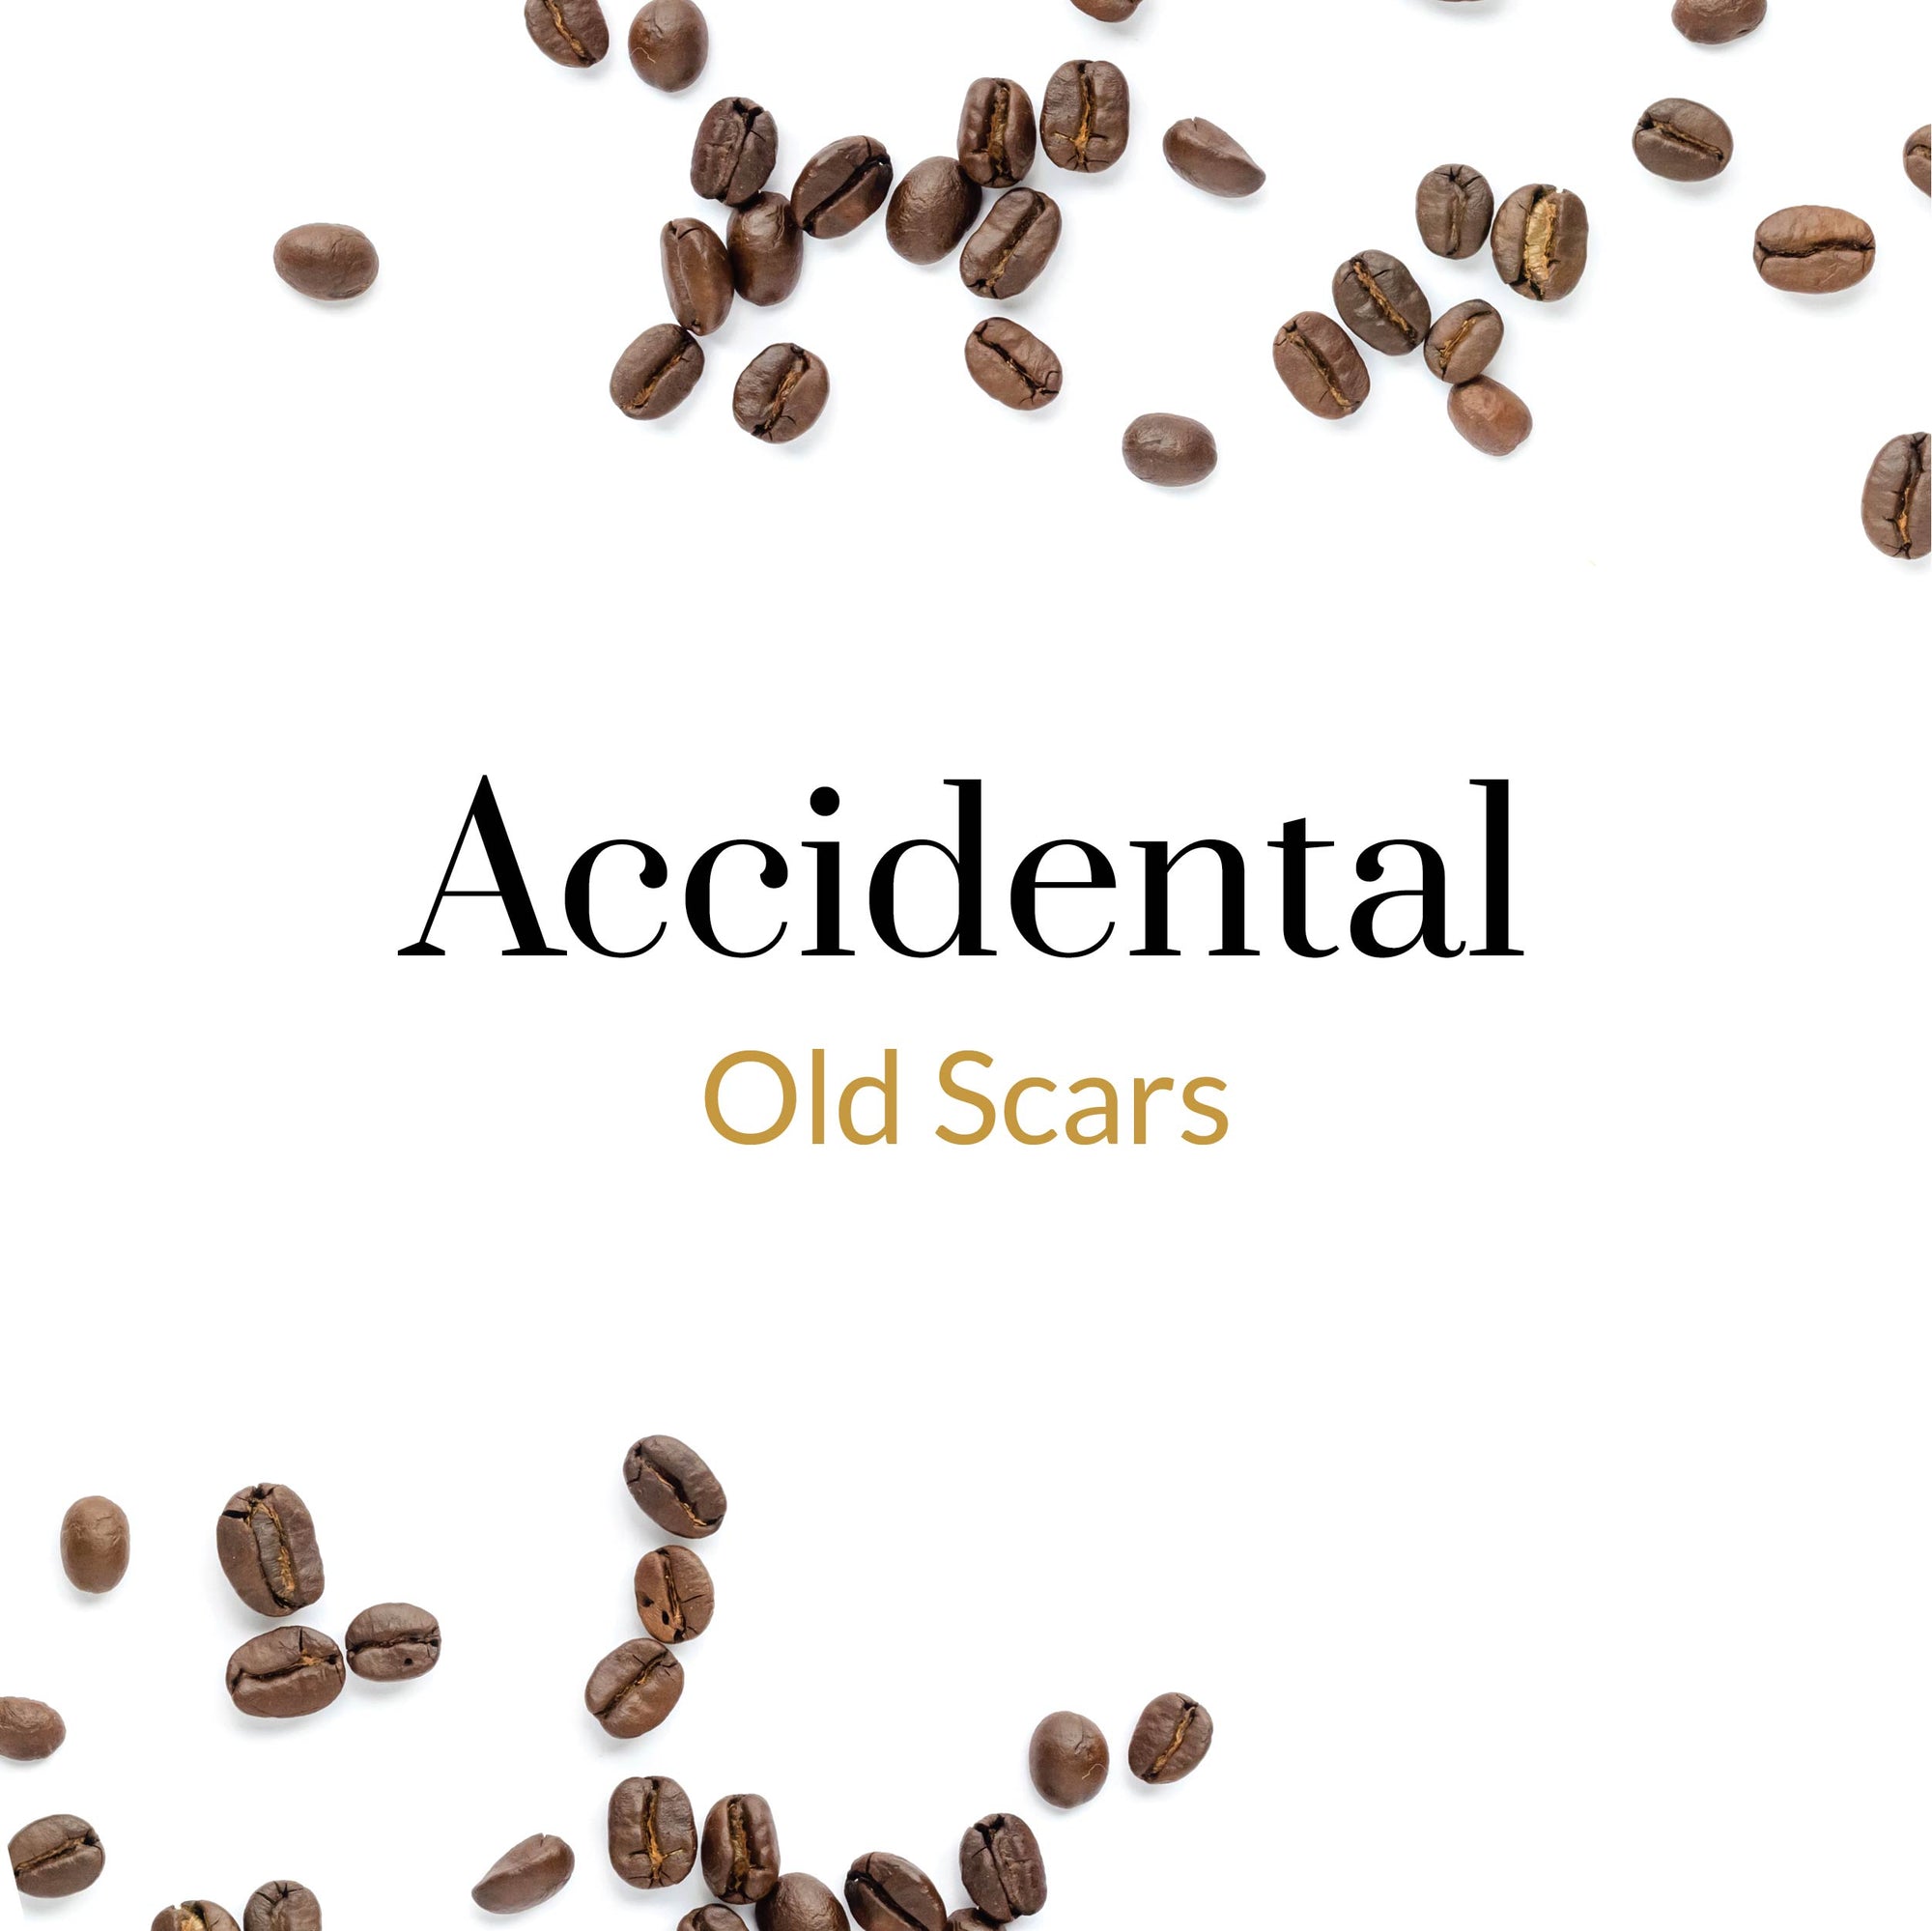 Old Scars - Accidental